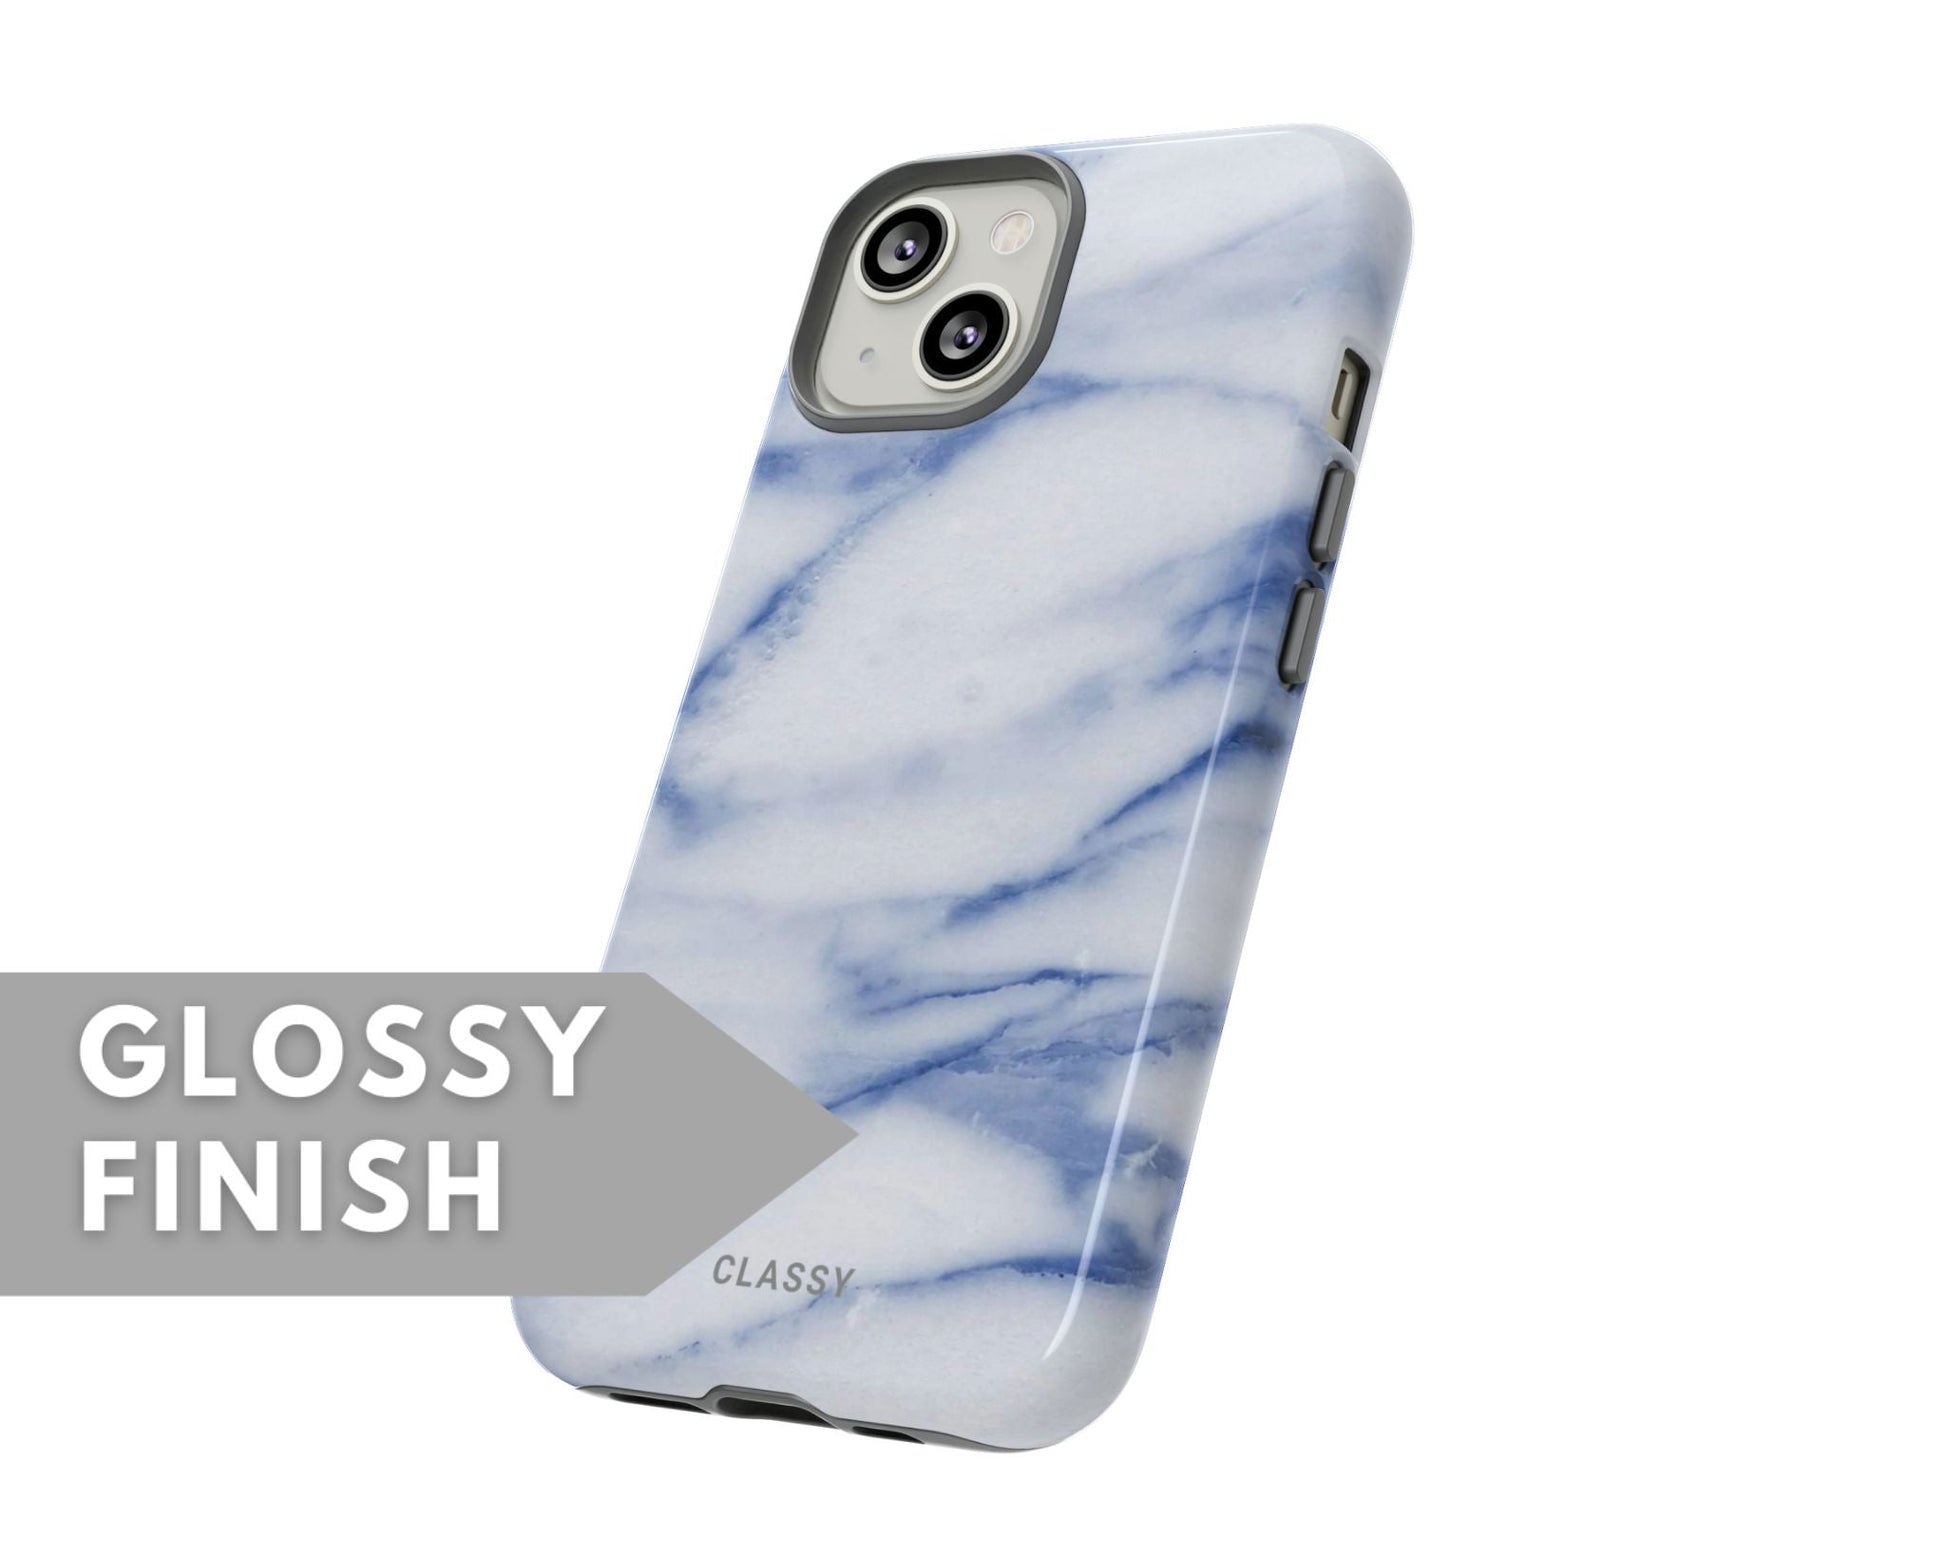 White and Blue Marble Tough Case - Classy Cases